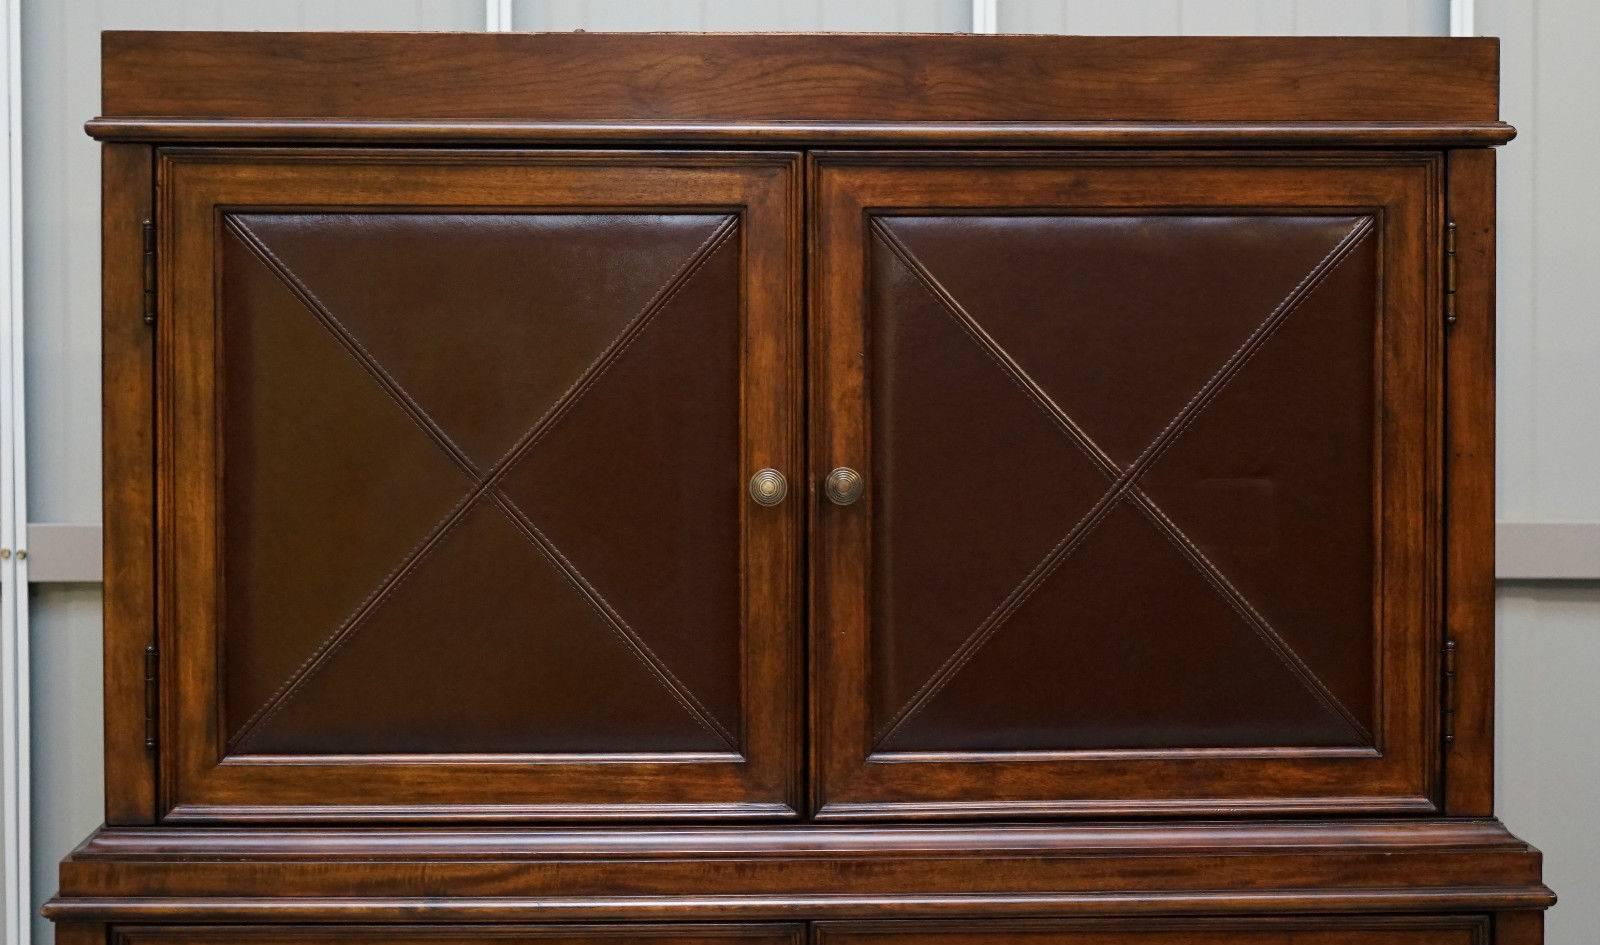 Edwardian Rare Bernhardt Leather and Mahogany Entertainment Cabinet with Drawers